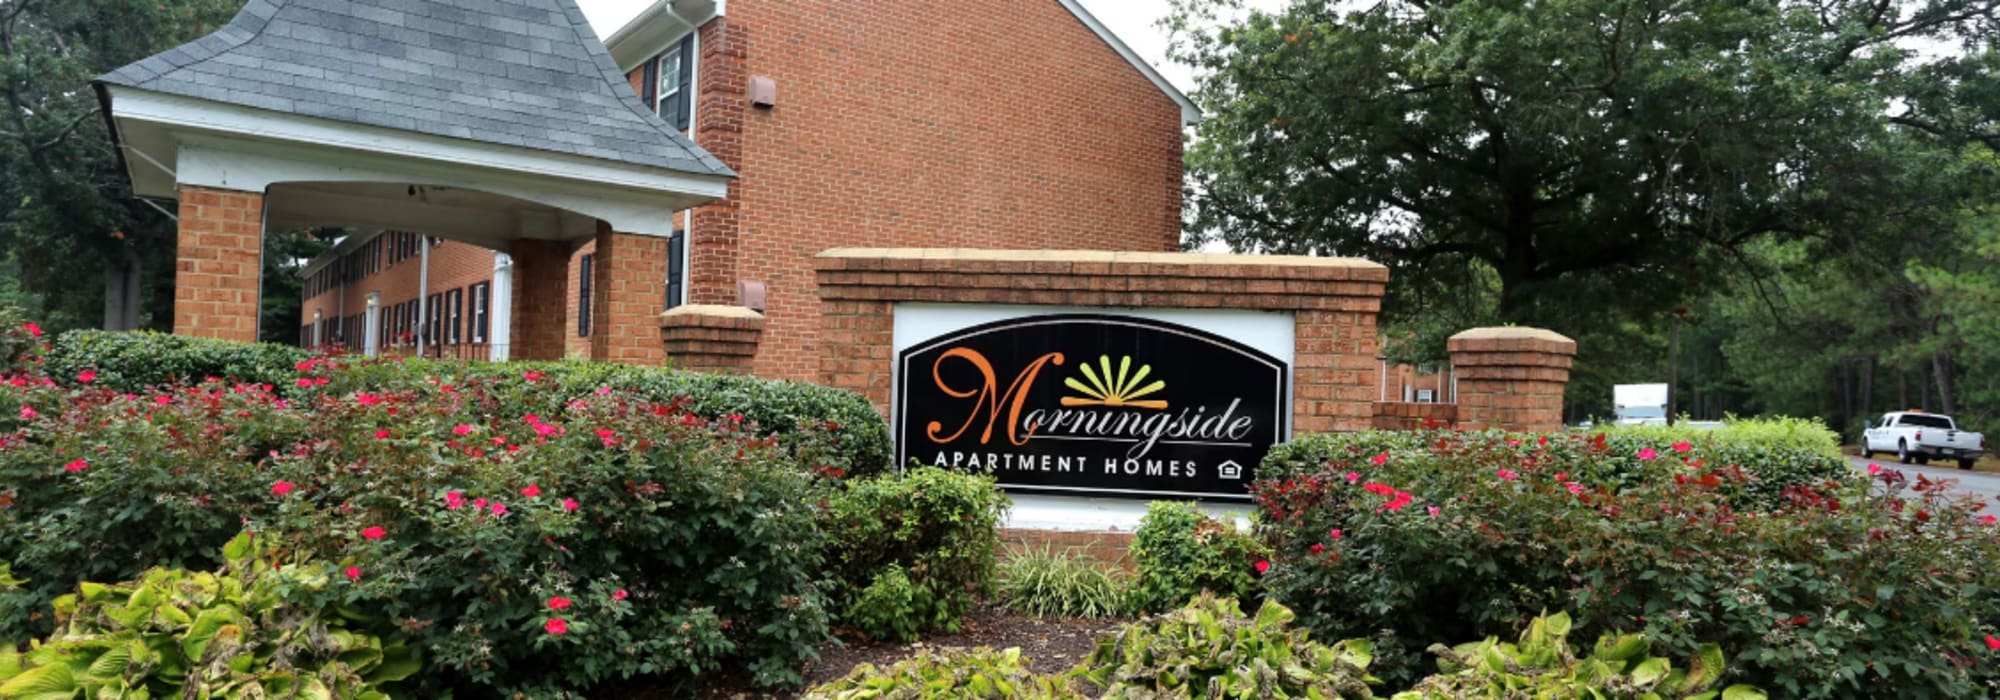 Entrance to Morningside Apartments in Richmond, Virginia